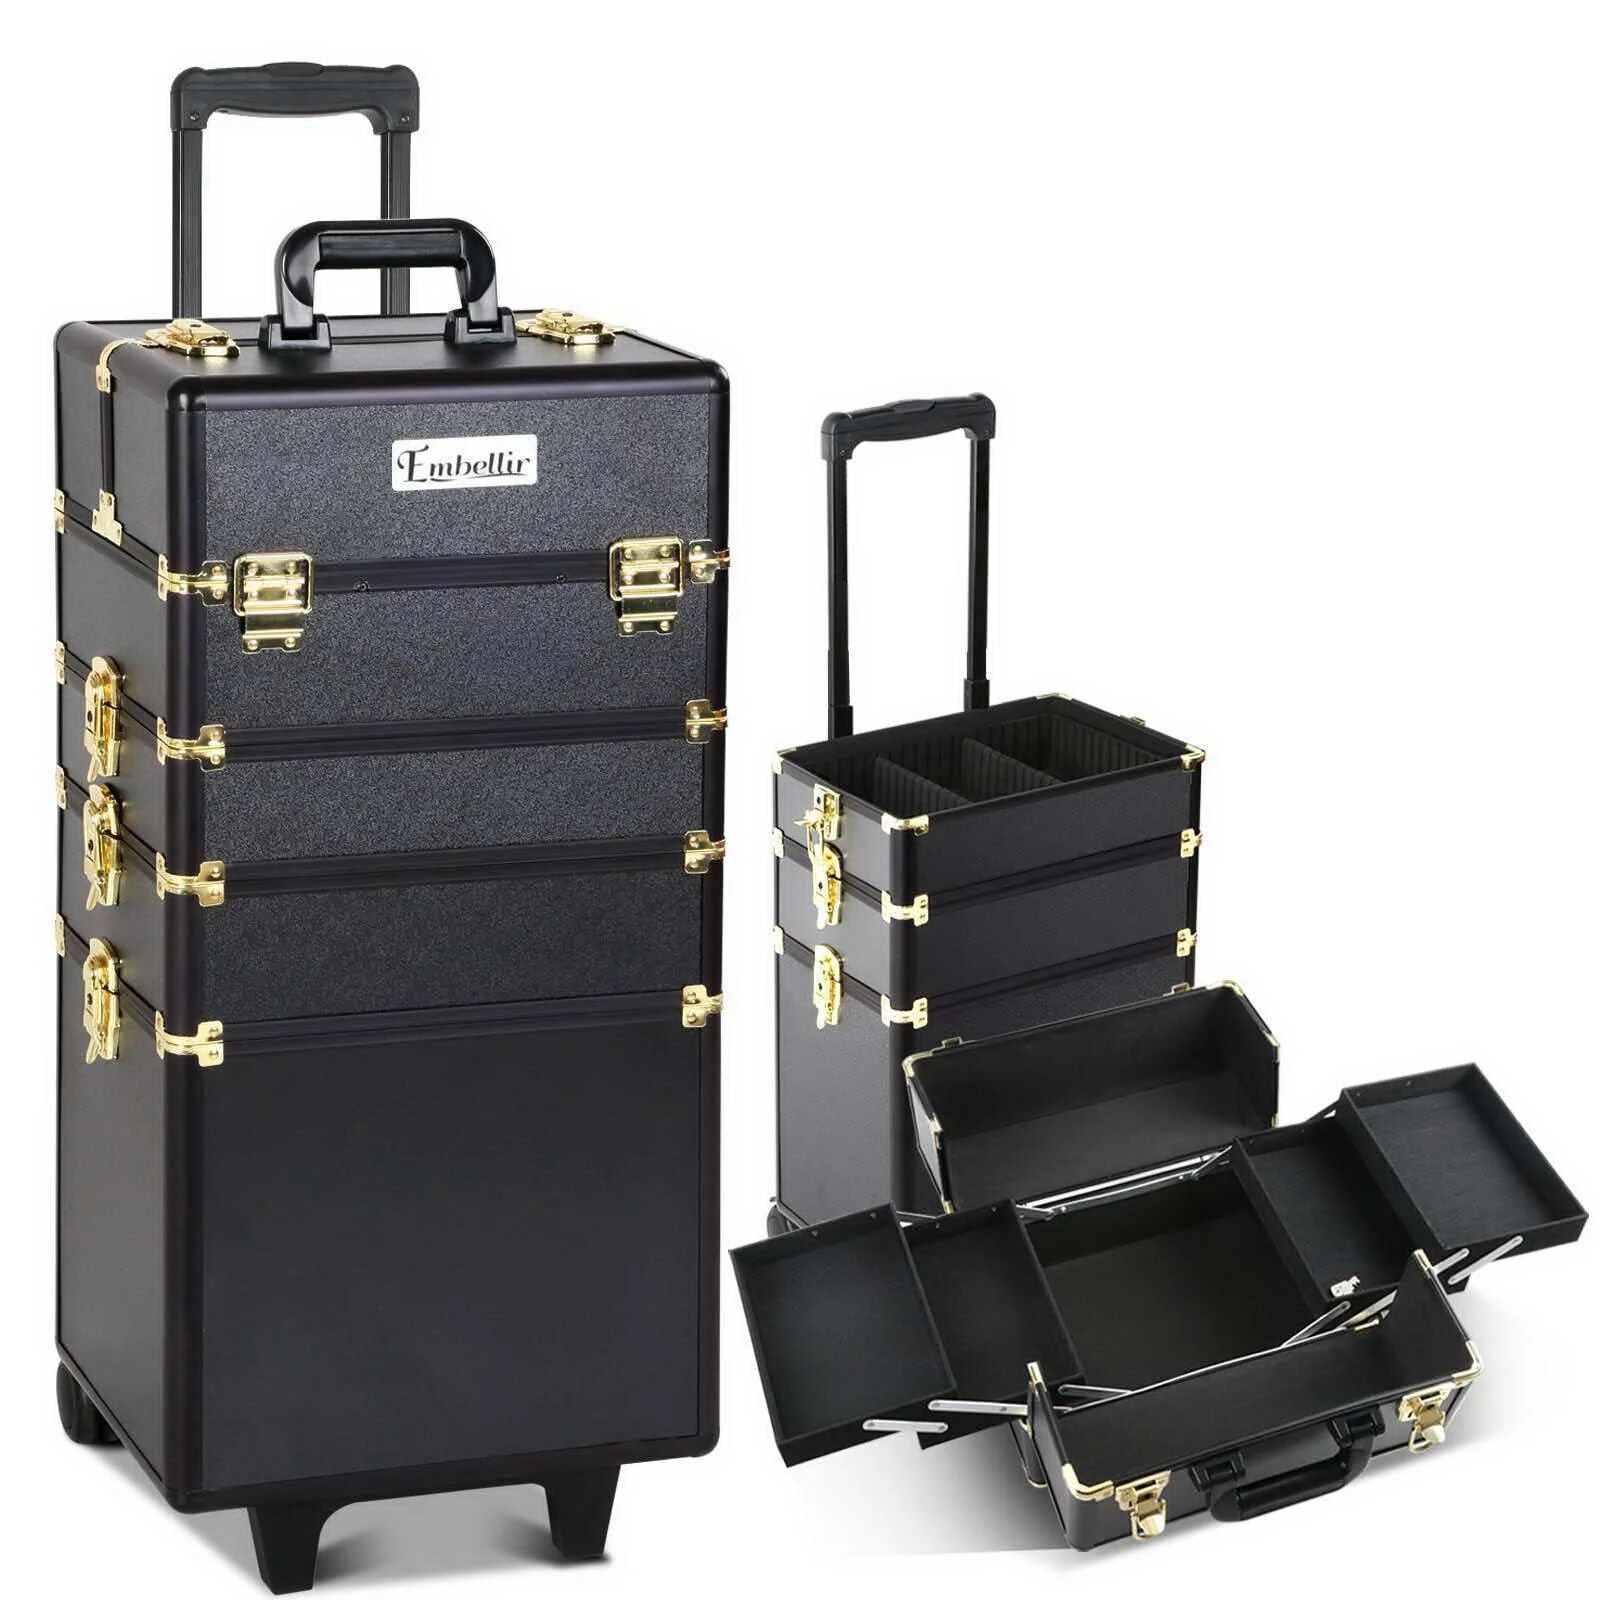 Embellir 7 in 1 Make Up Cosmetic Beauty Case - Black & Gold